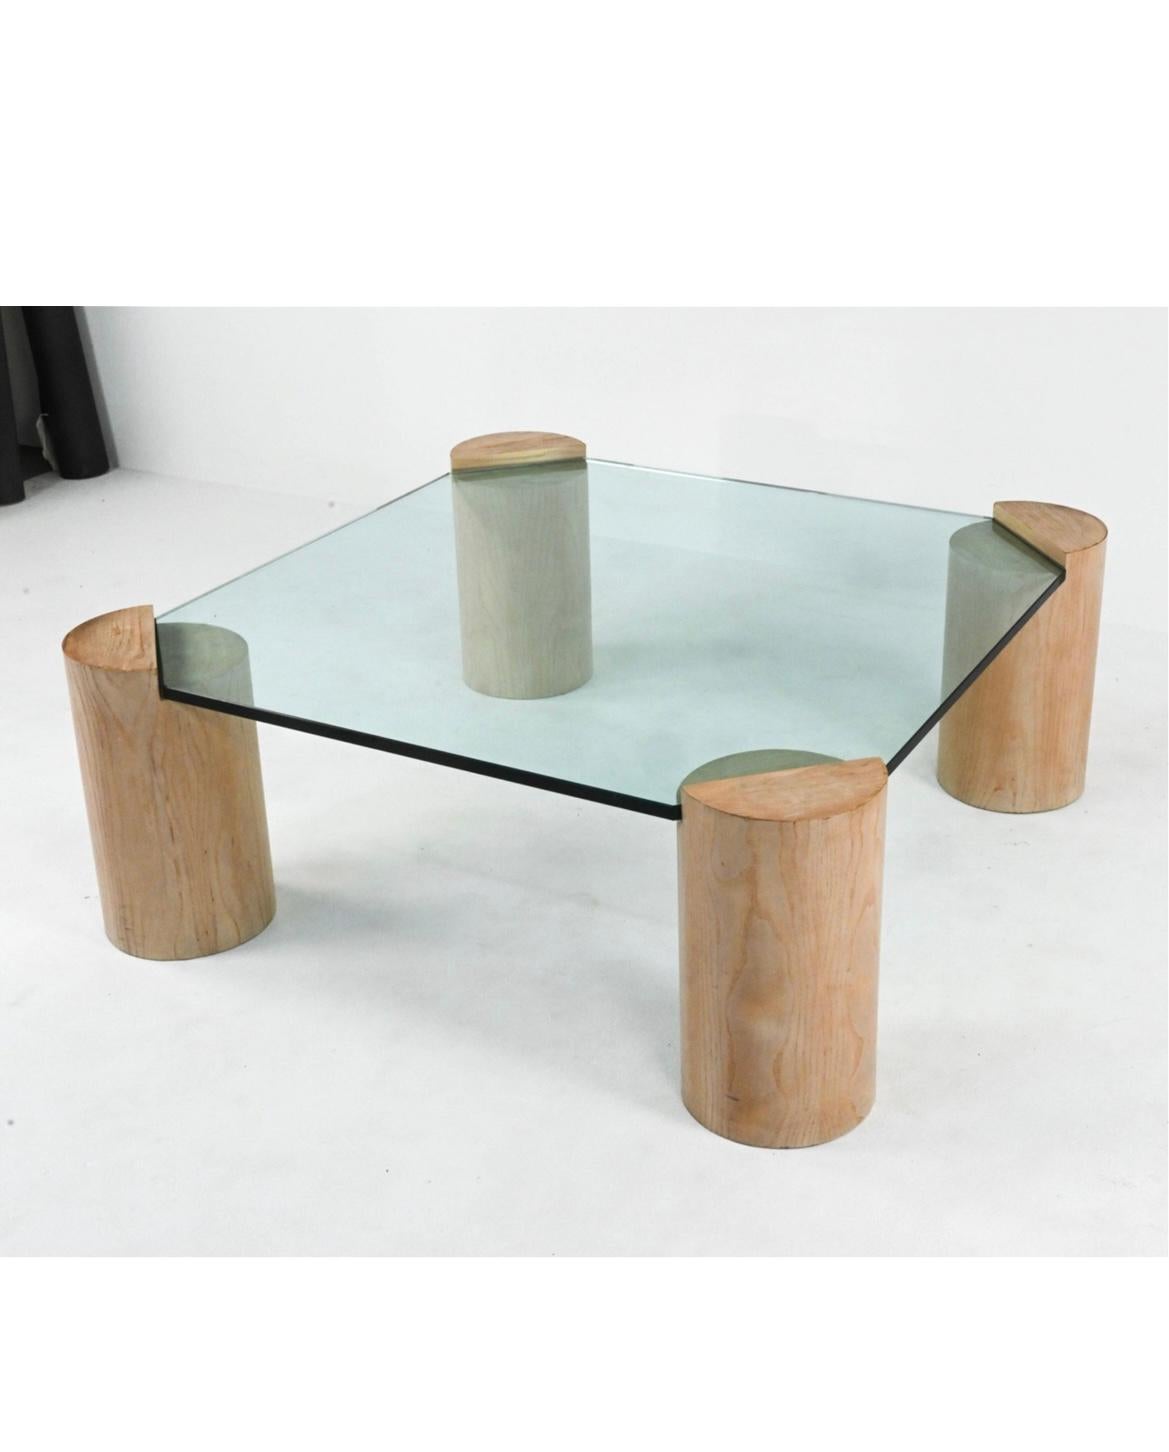 Mid-Century Modern sculptural coffee table with cylindrical wood legs and thick tempered glass top in the style of Karl Springer. C. 1980. Located in NYC.

Dimensions: H 17